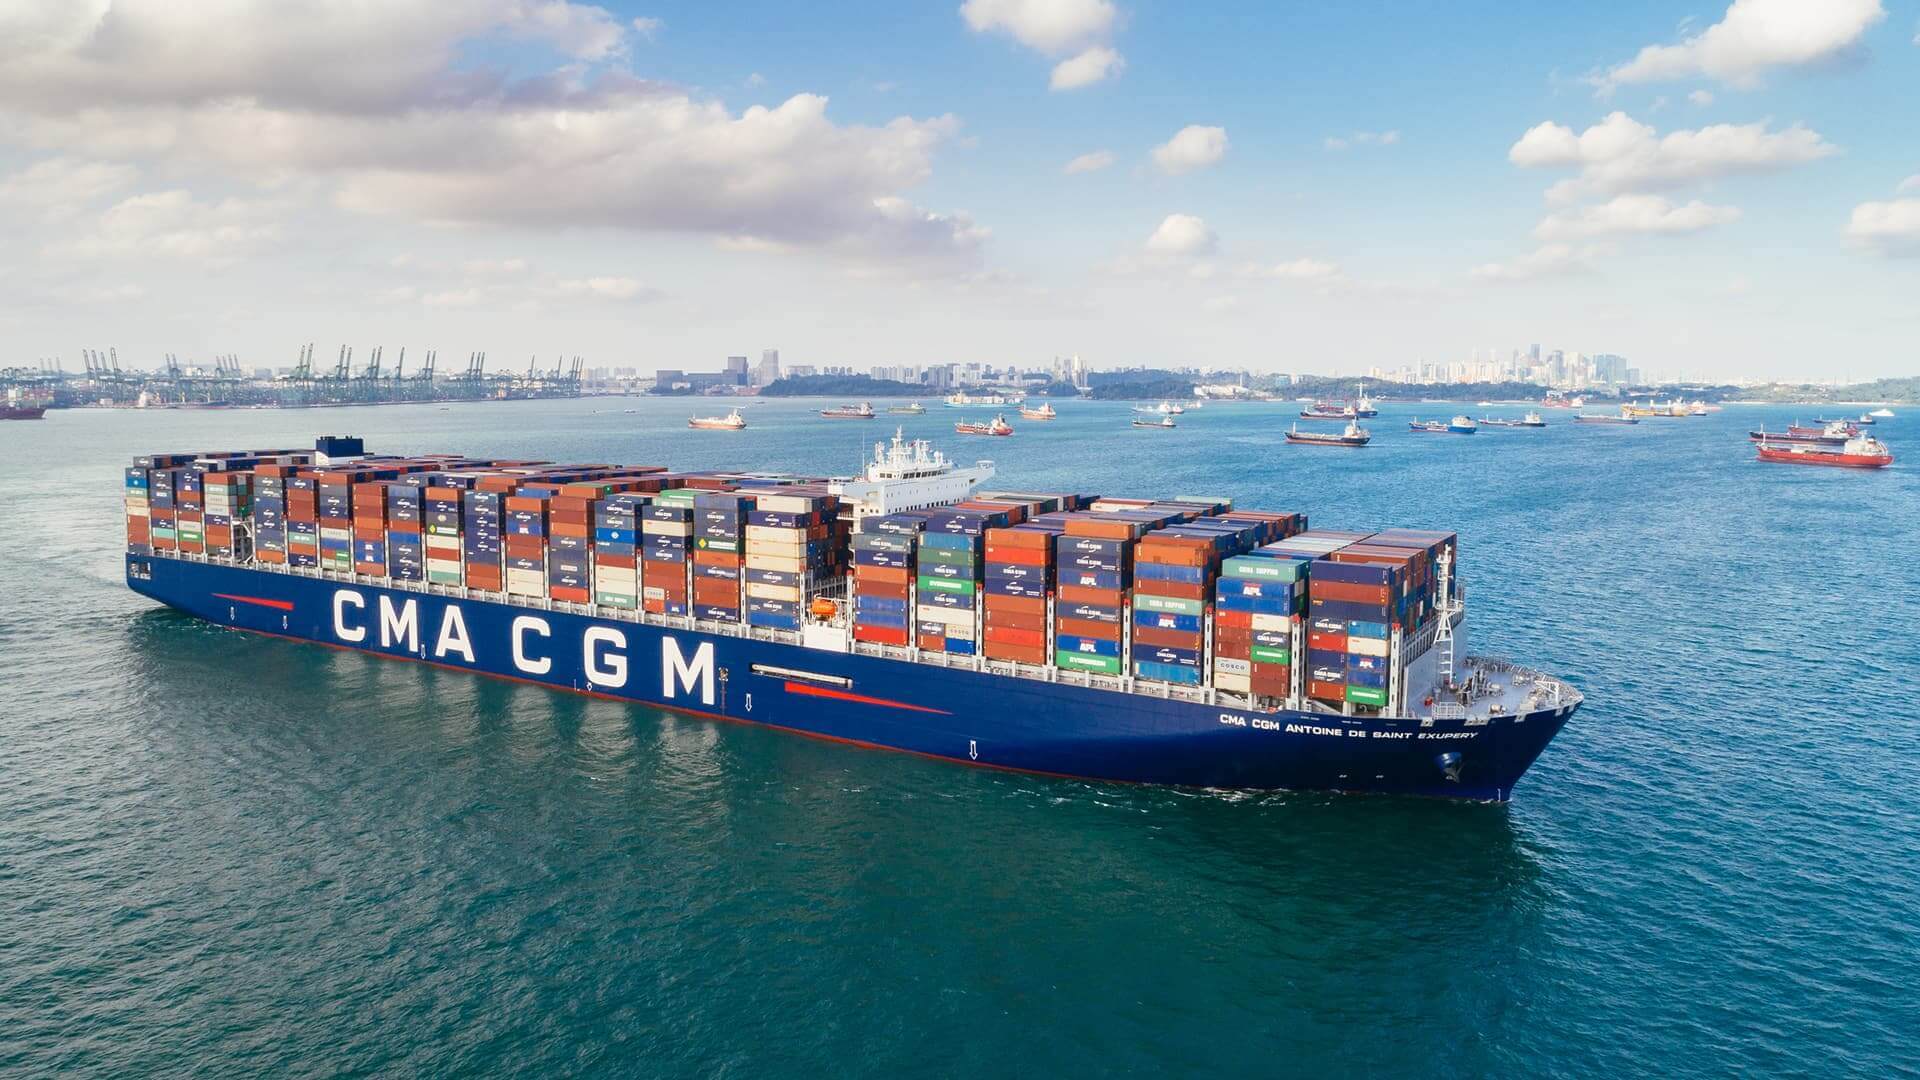 CMA CGM, World’s 4th Largest Shipping Company, Announces Blacklist to Protect Biodiversity